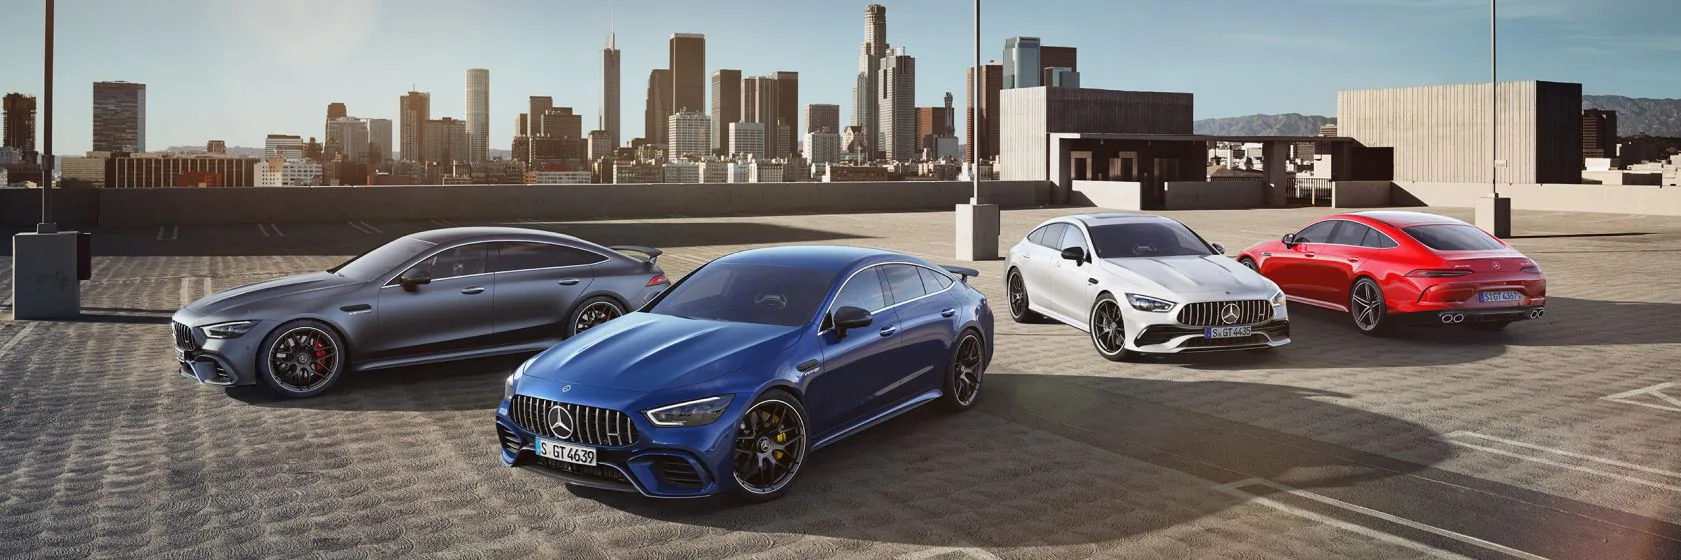 AMG GT lineup